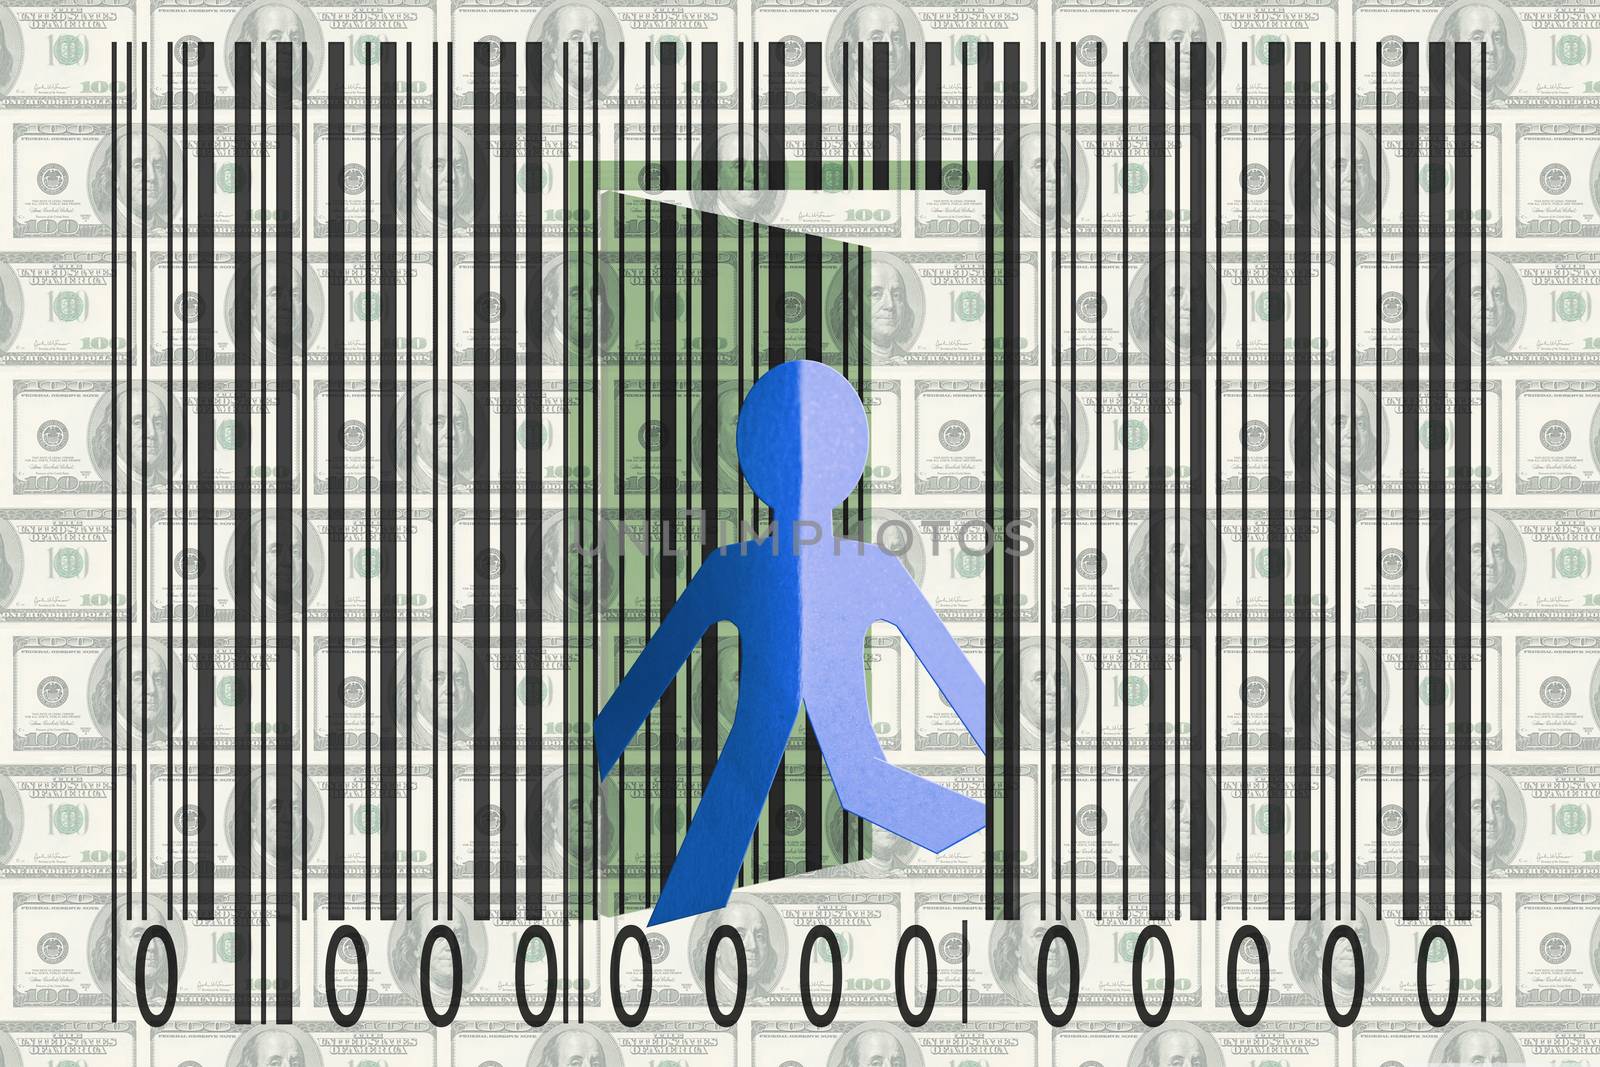 Paperman coming out of a bar code with Dollars as Backround by yands